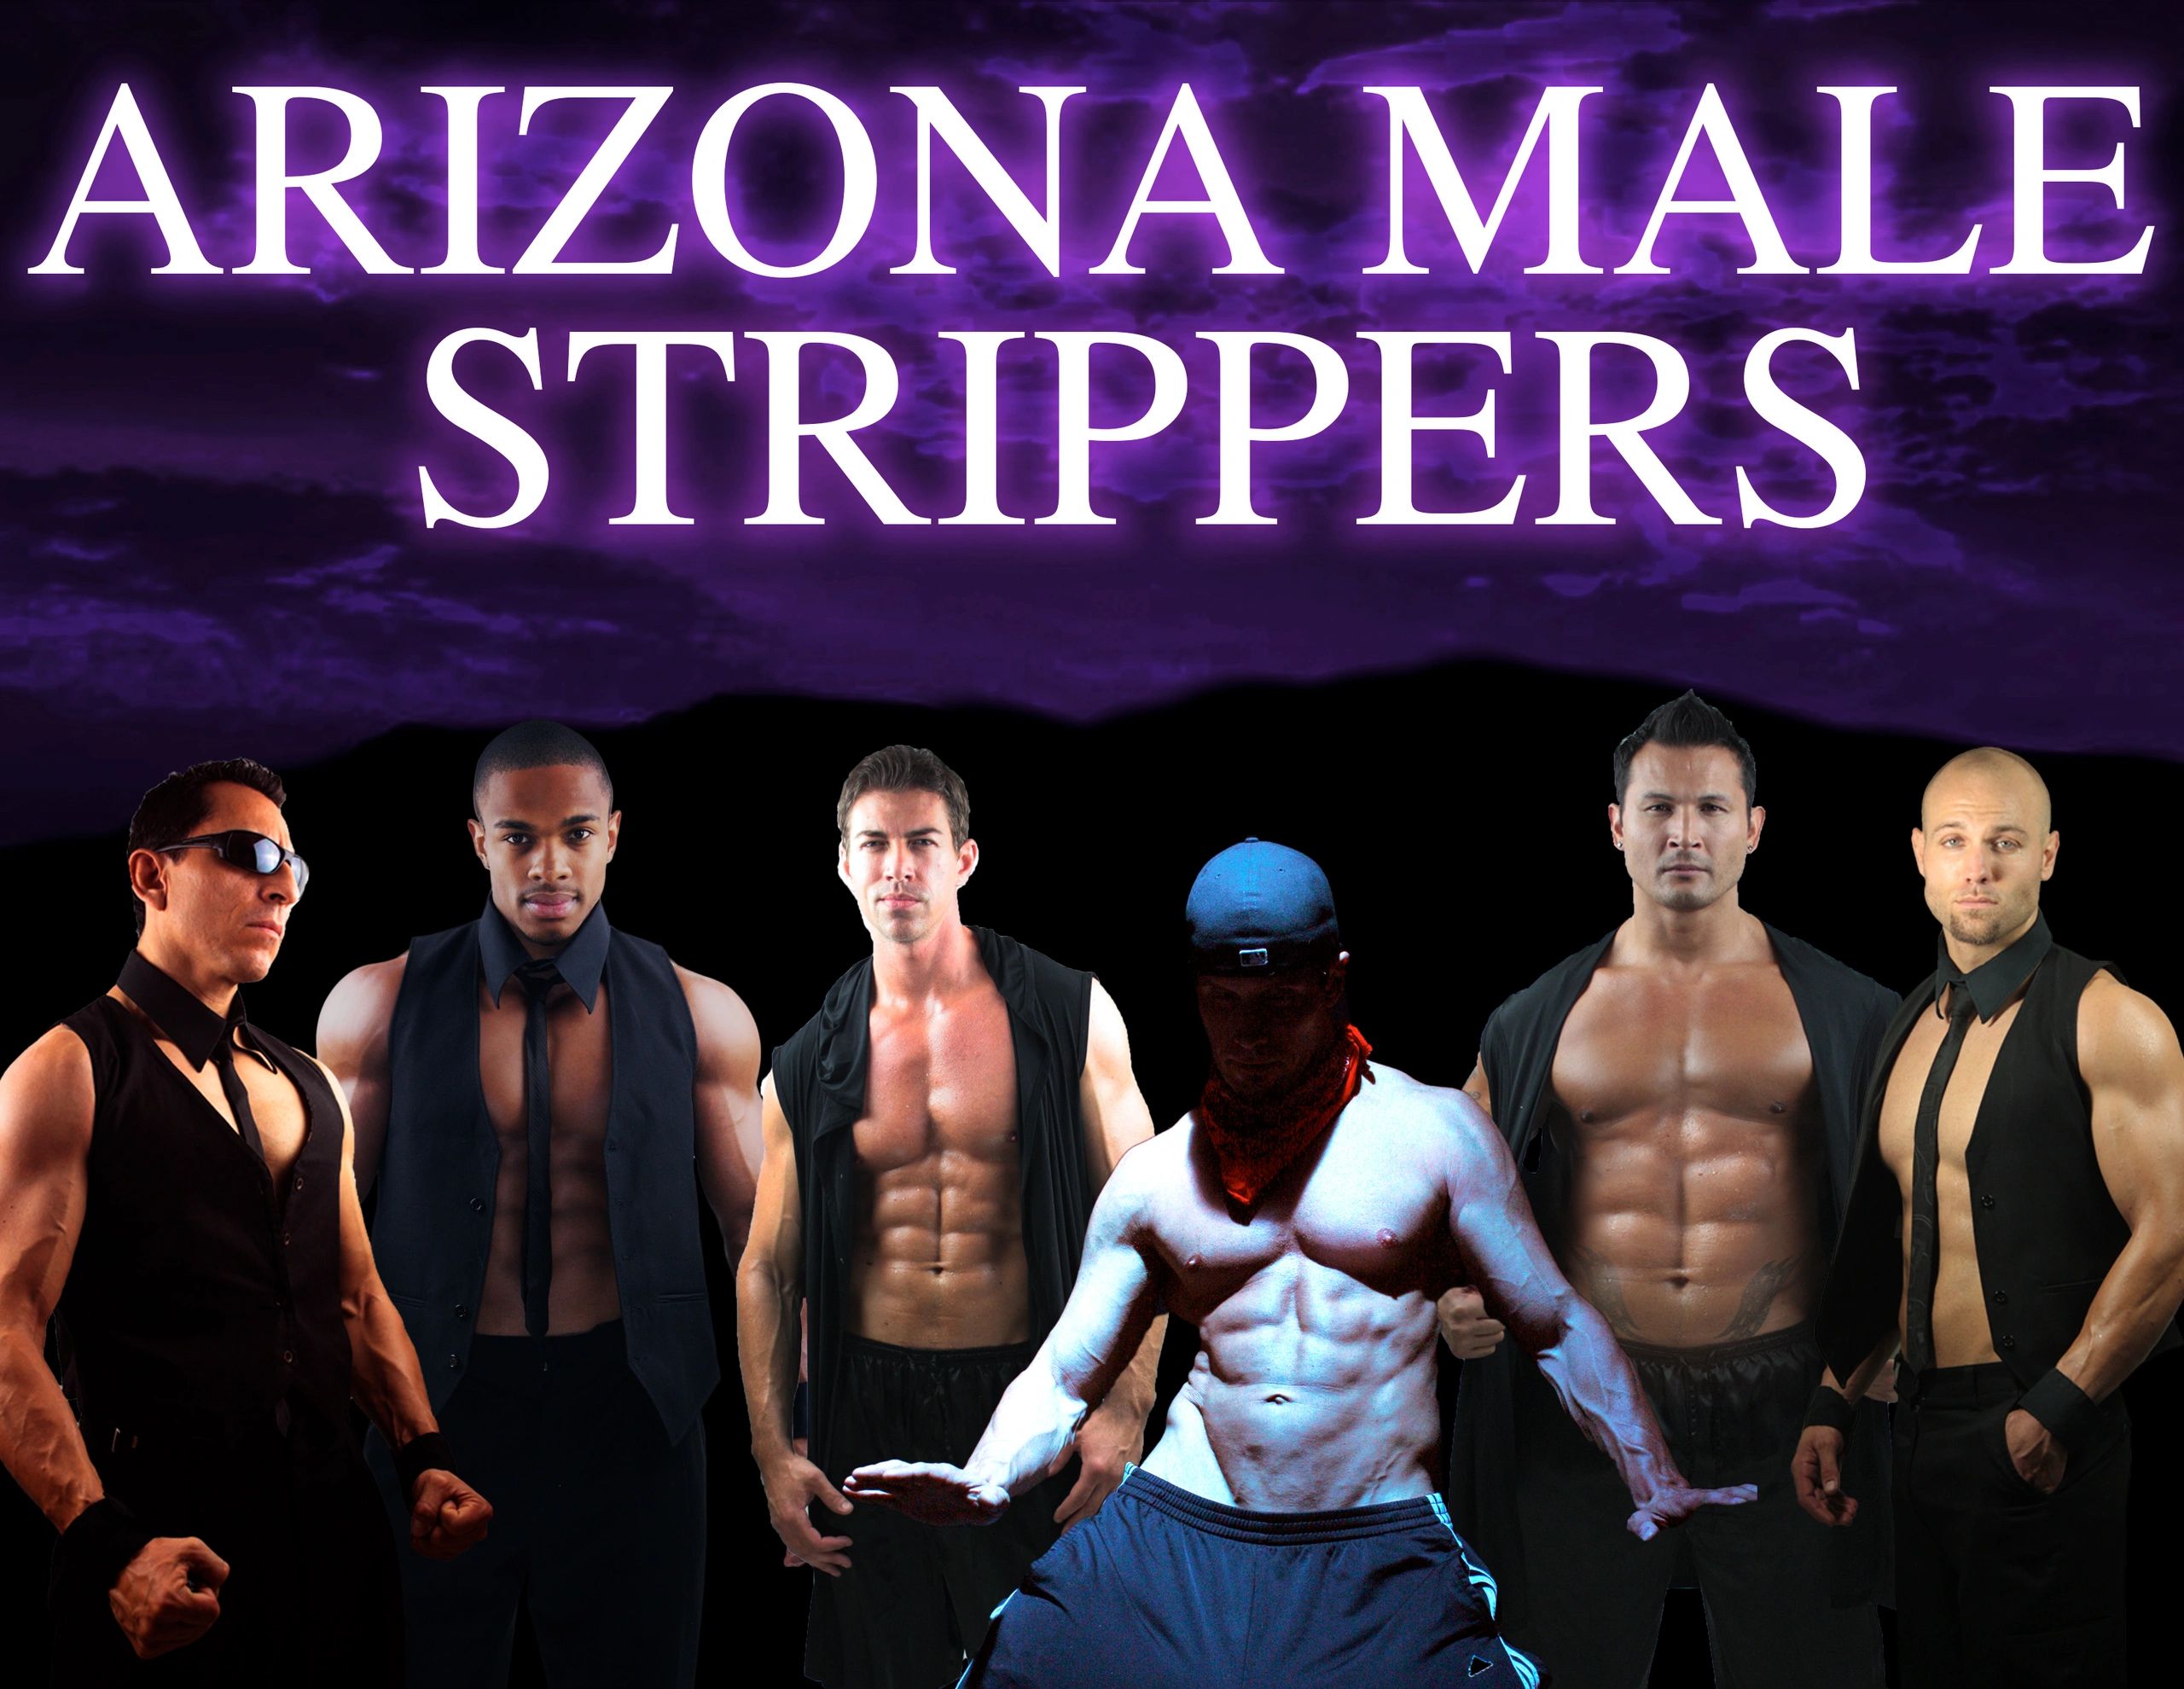 Scottsdale male strippers, banner of male strippers in Scottsdale, Arizona strippers in Scottsdale